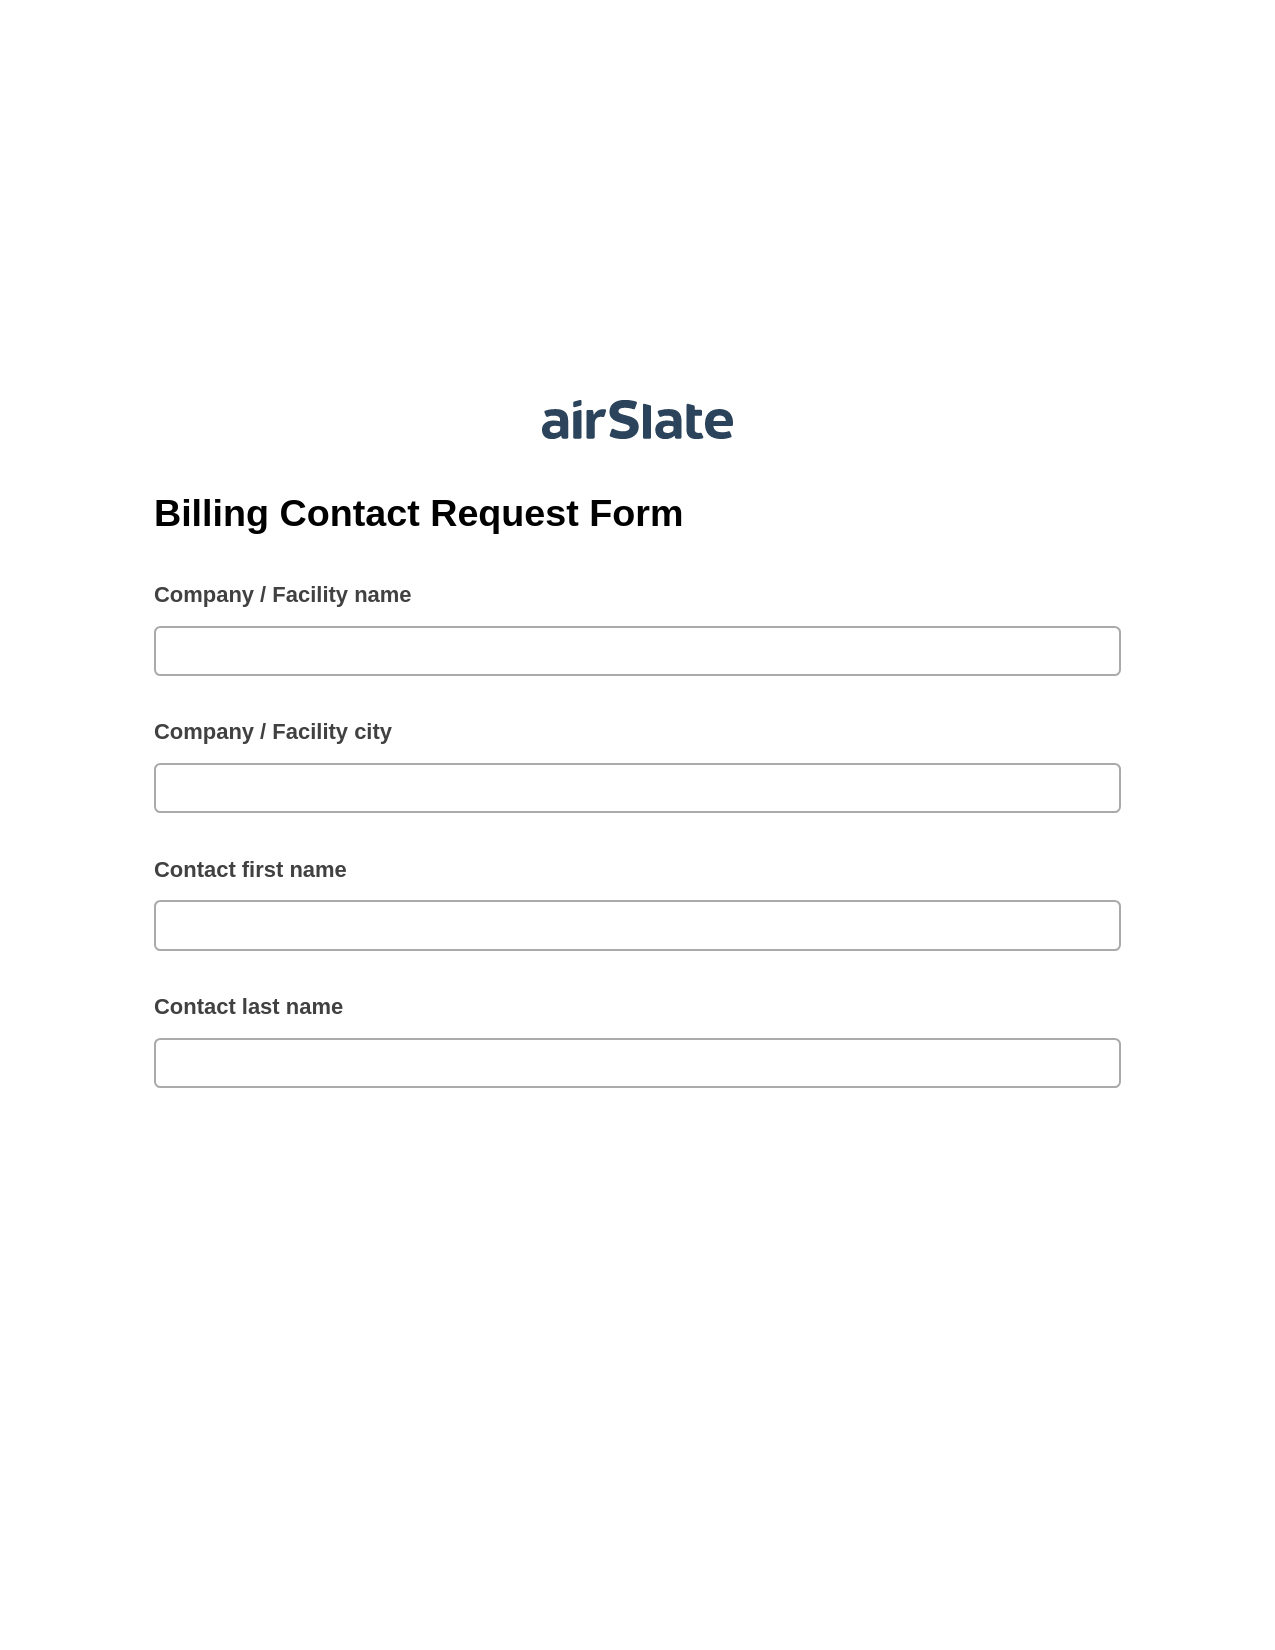 Multirole Billing Contact Request Form Pre-fill Dropdown from Airtable, Send Mailchimp Campaign Bot, Post-finish Document Bot